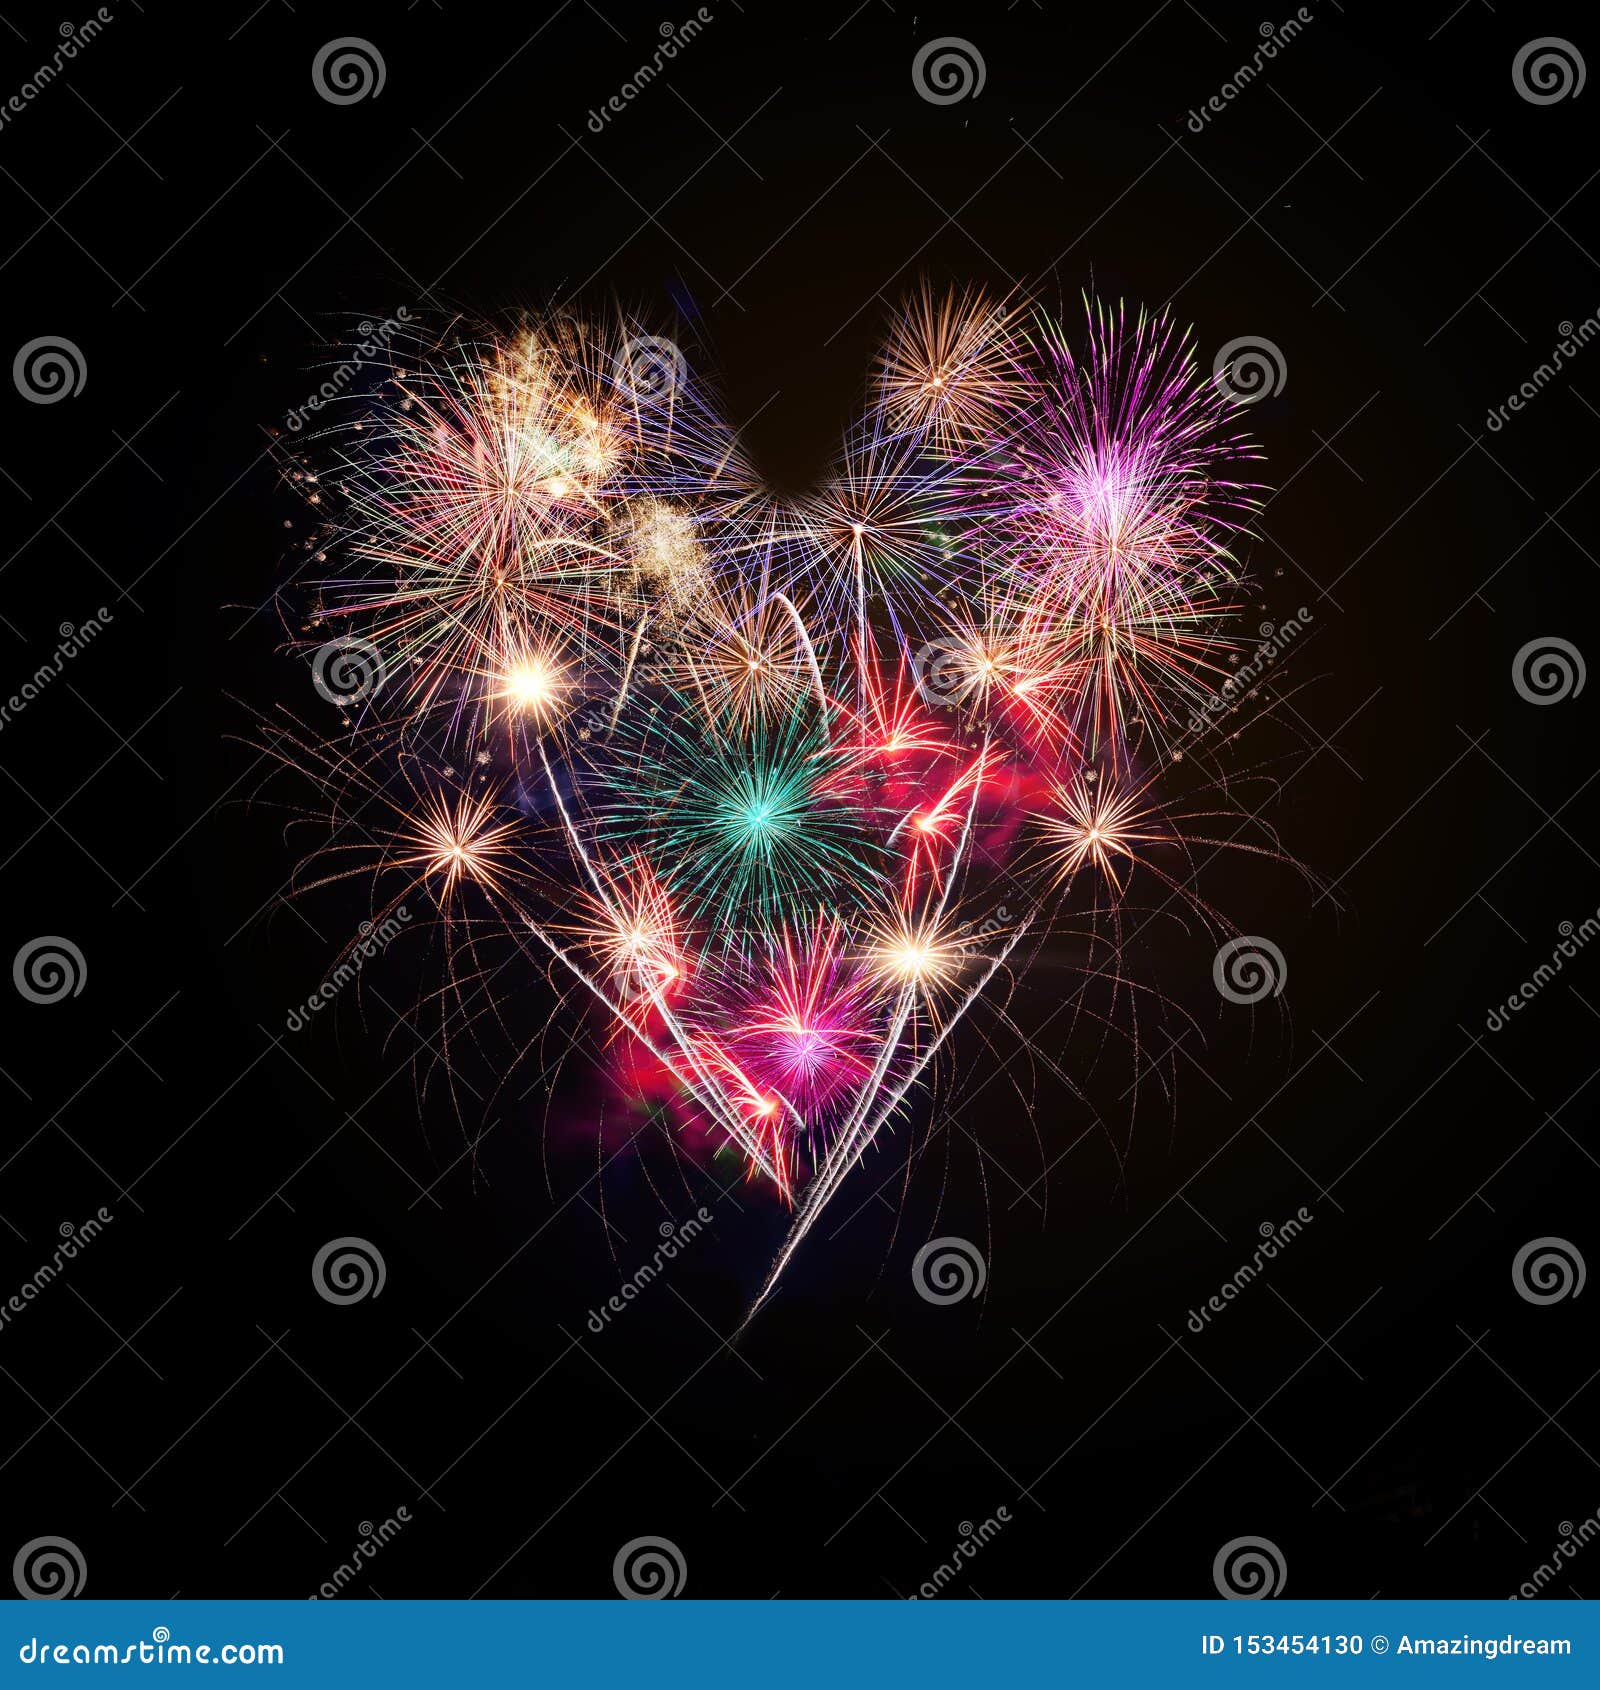 List 90+ Images where can i buy heart shaped fireworks Superb